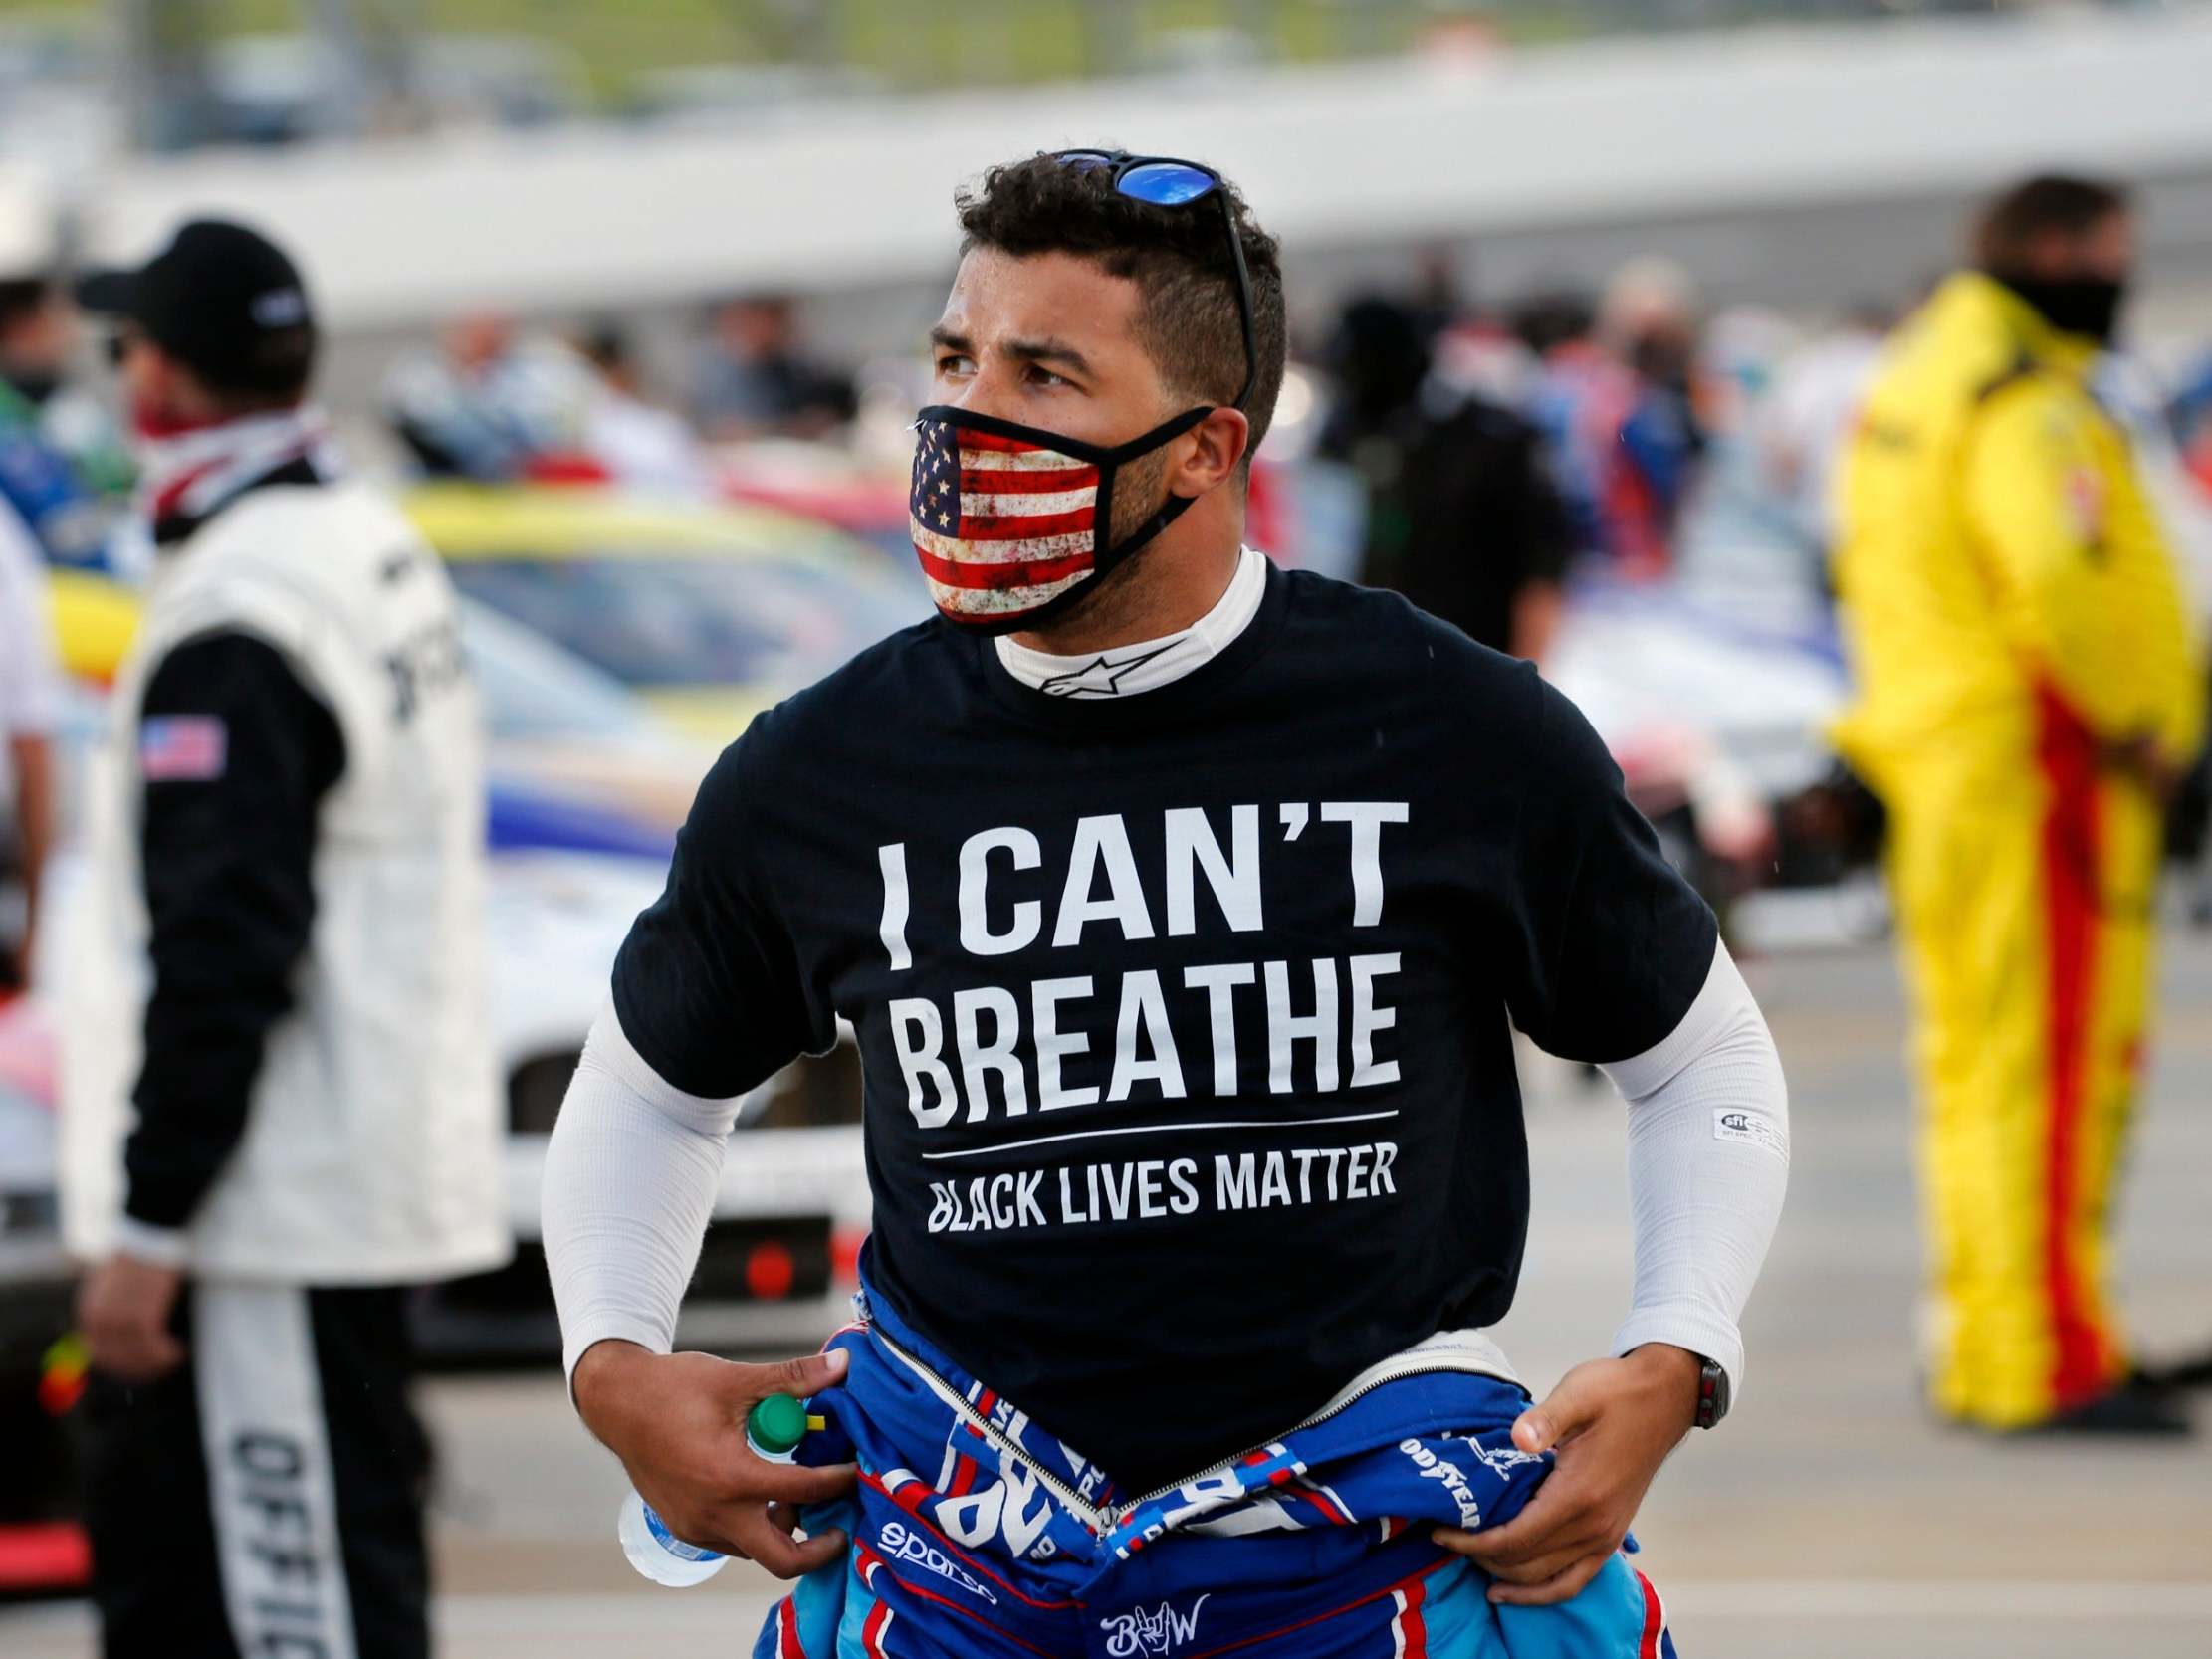 Bubba Wallace wore a T-shirt in support of George Floyd and racial equality before the race